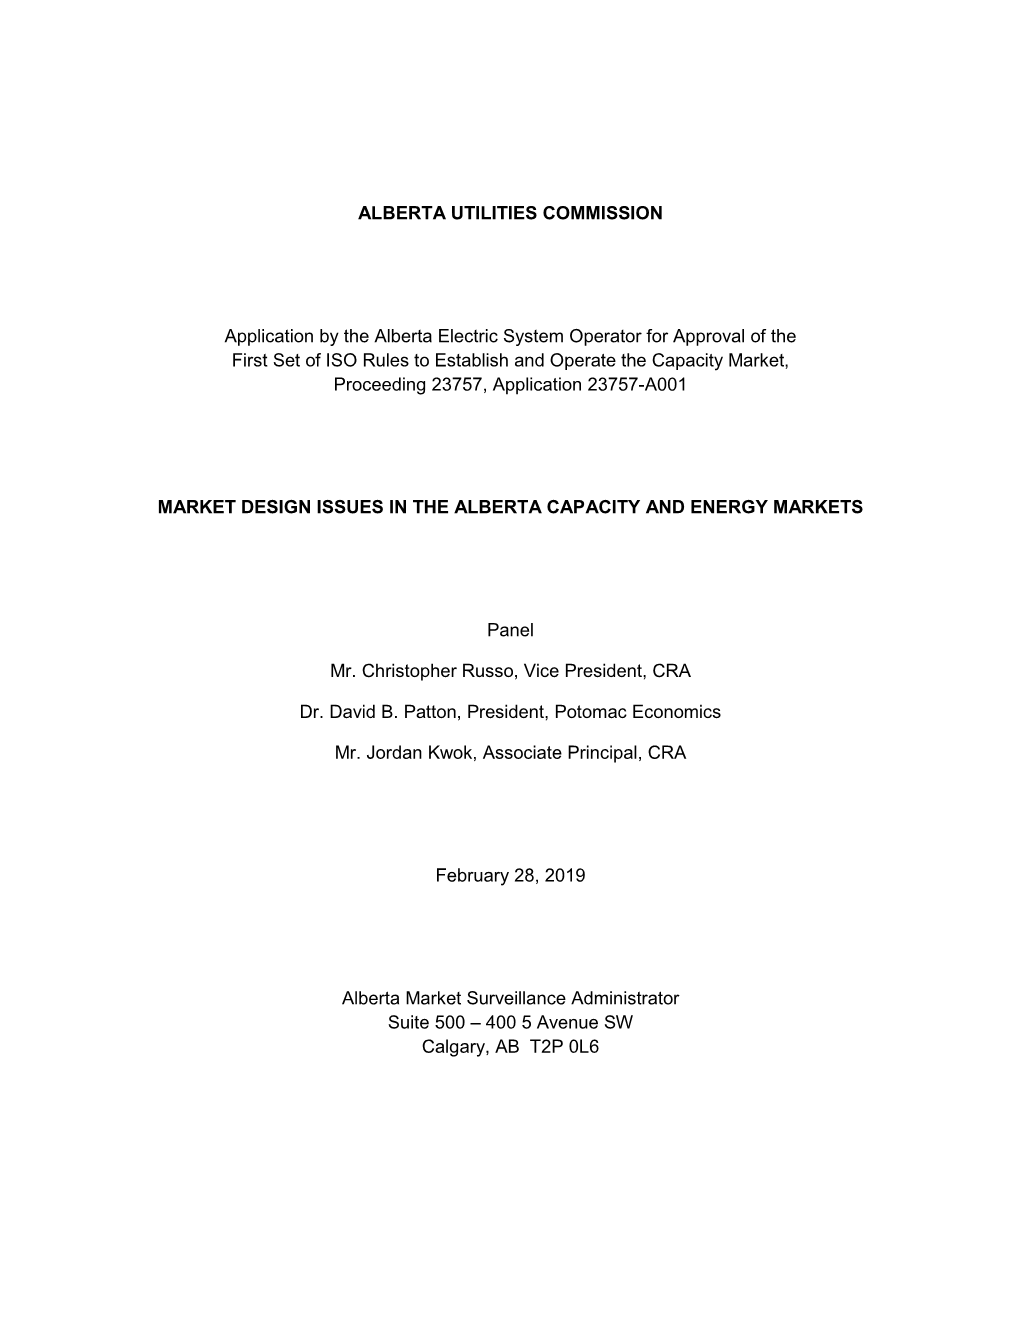 ALBERTA UTILITIES COMMISSION Application by the Alberta Electric System Operator for Approval of the First Set of ISO Rules to E